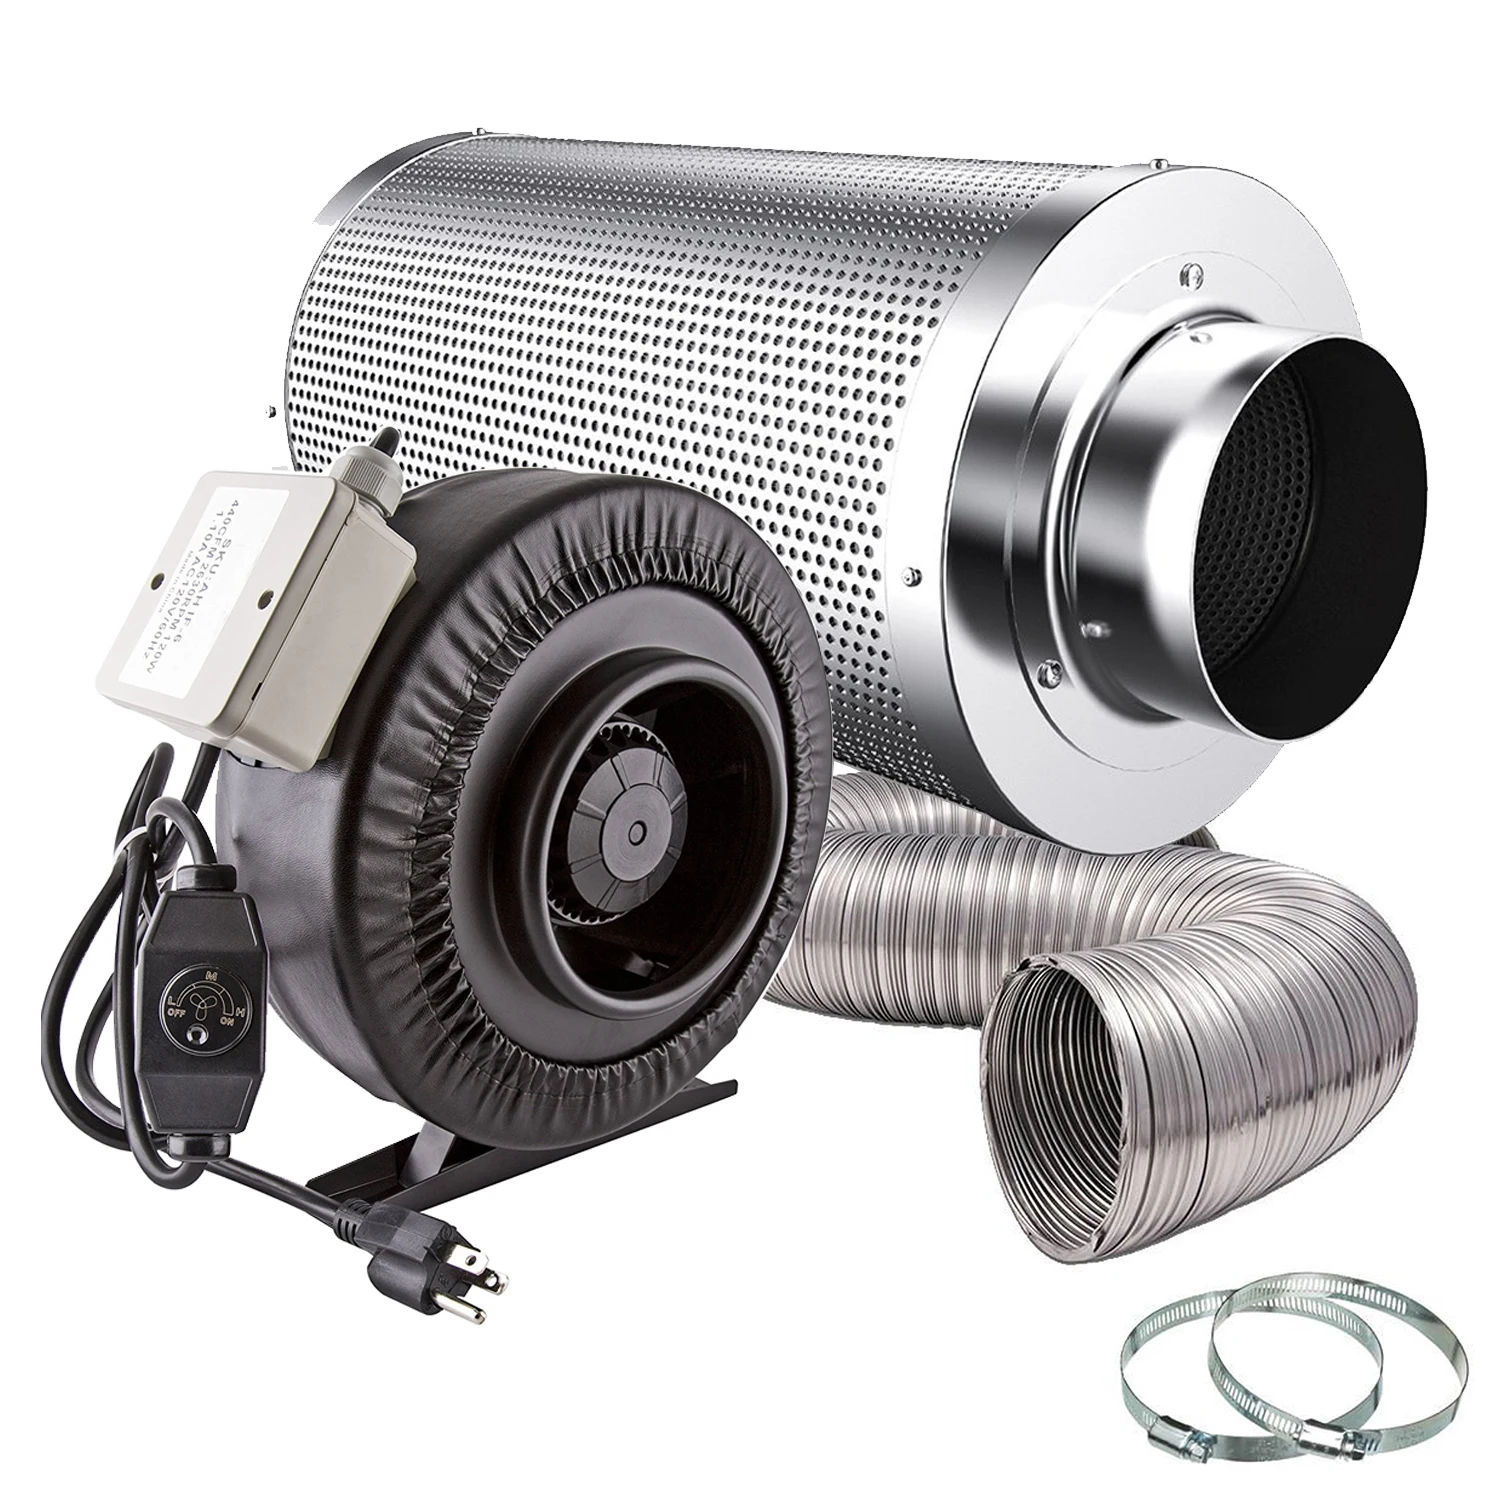 Ducting Hydroponic Ventilation Kit Hydro Crunch 4 inch 100 CFM Booster Fan & 4 x 12 Carbon Filter with 4 x 25ft 